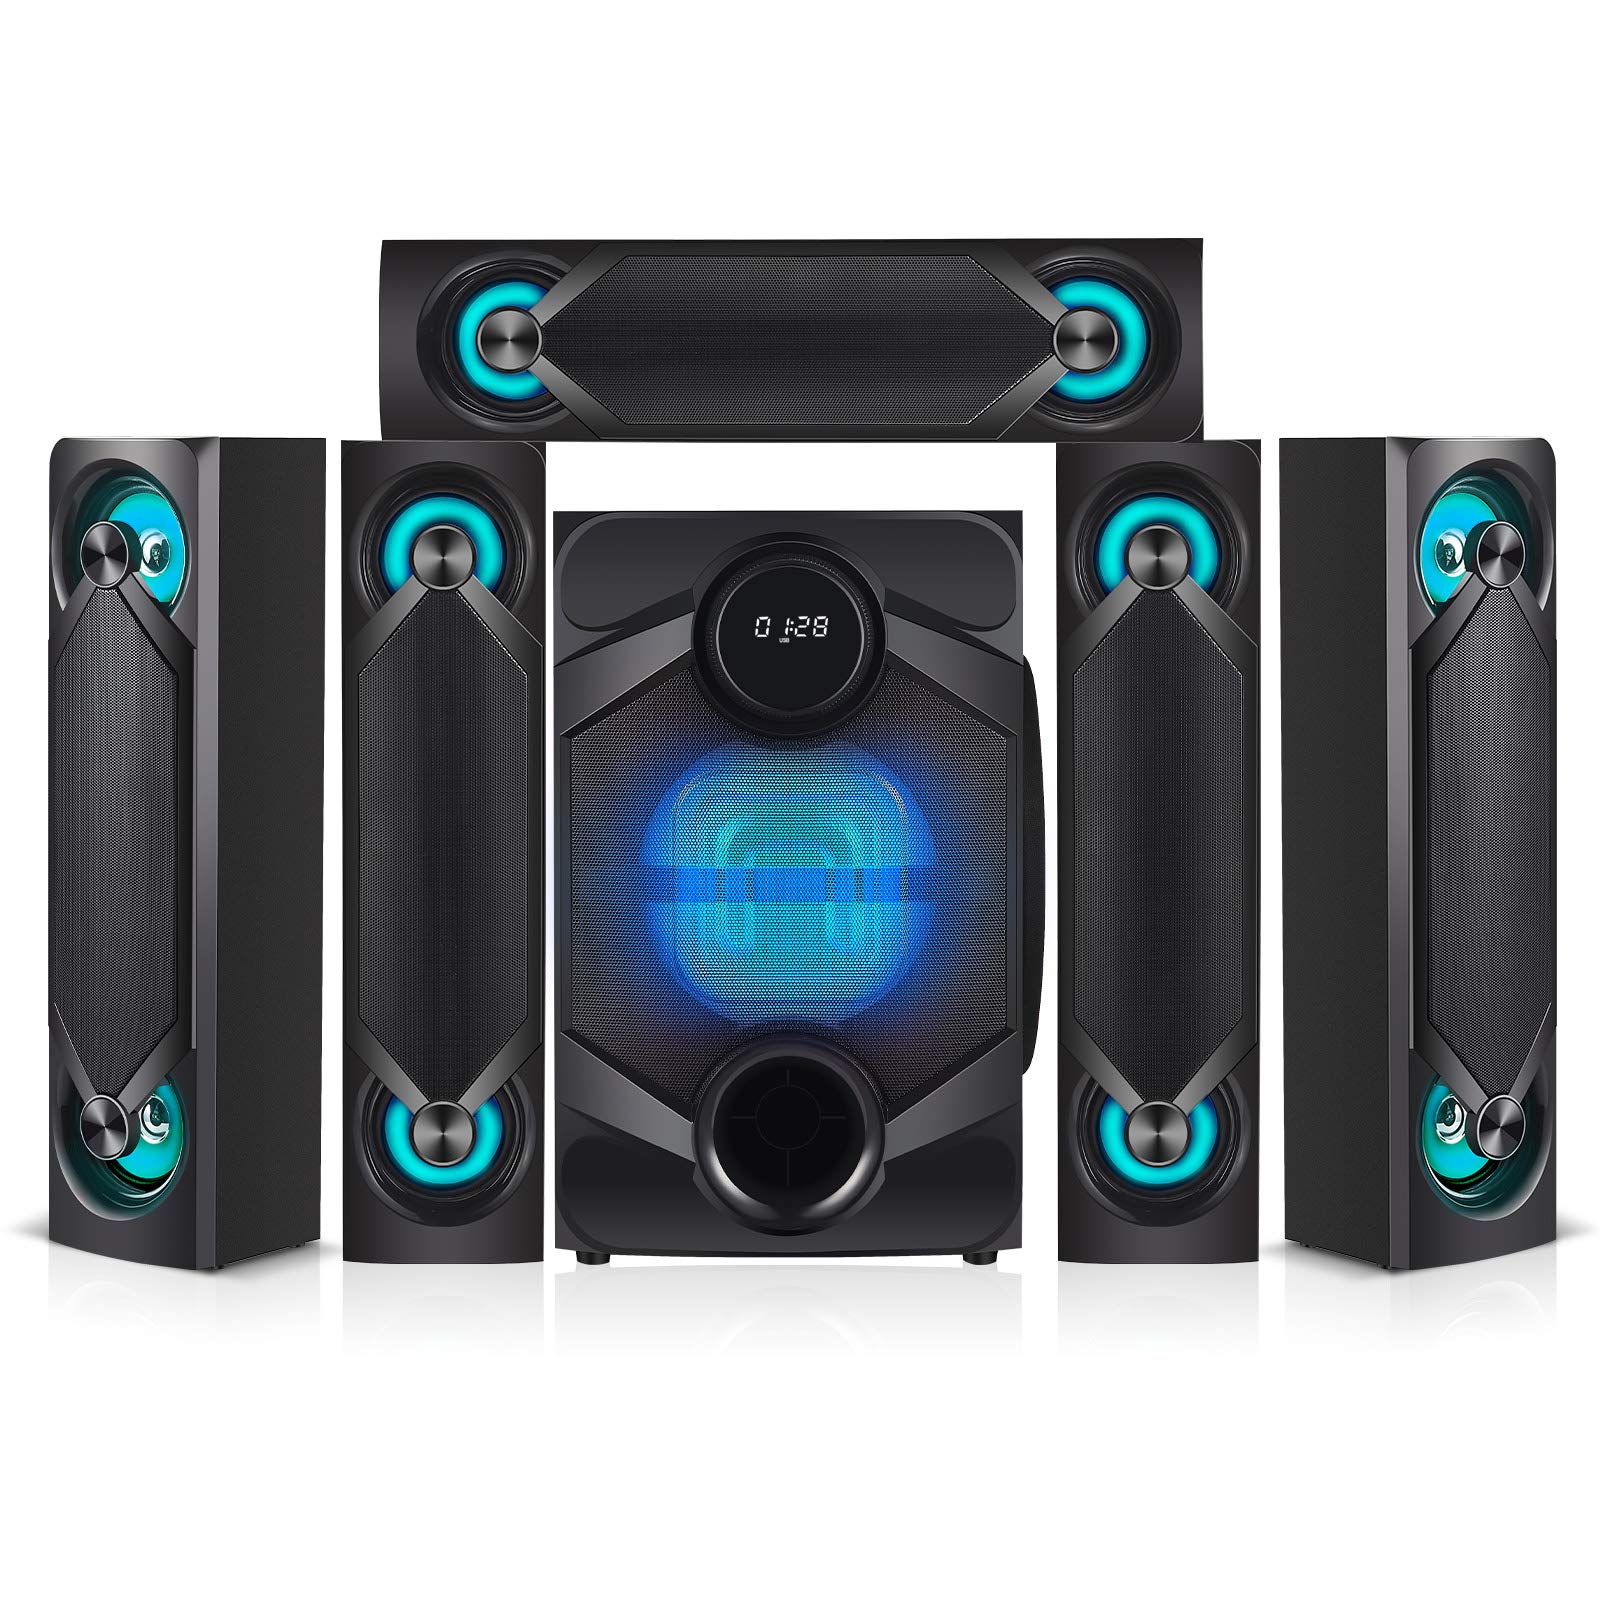 Nyne NHT5.1RGB 5.1 Channel Surround Sound Home Audio Theatre System – for TV, Bluetooth, LED, USB, SD, RCA Out in, 8 Inch Active Subwoofer, 6 Inch Passive Radiator, Soundbar, Cinema Acoustics